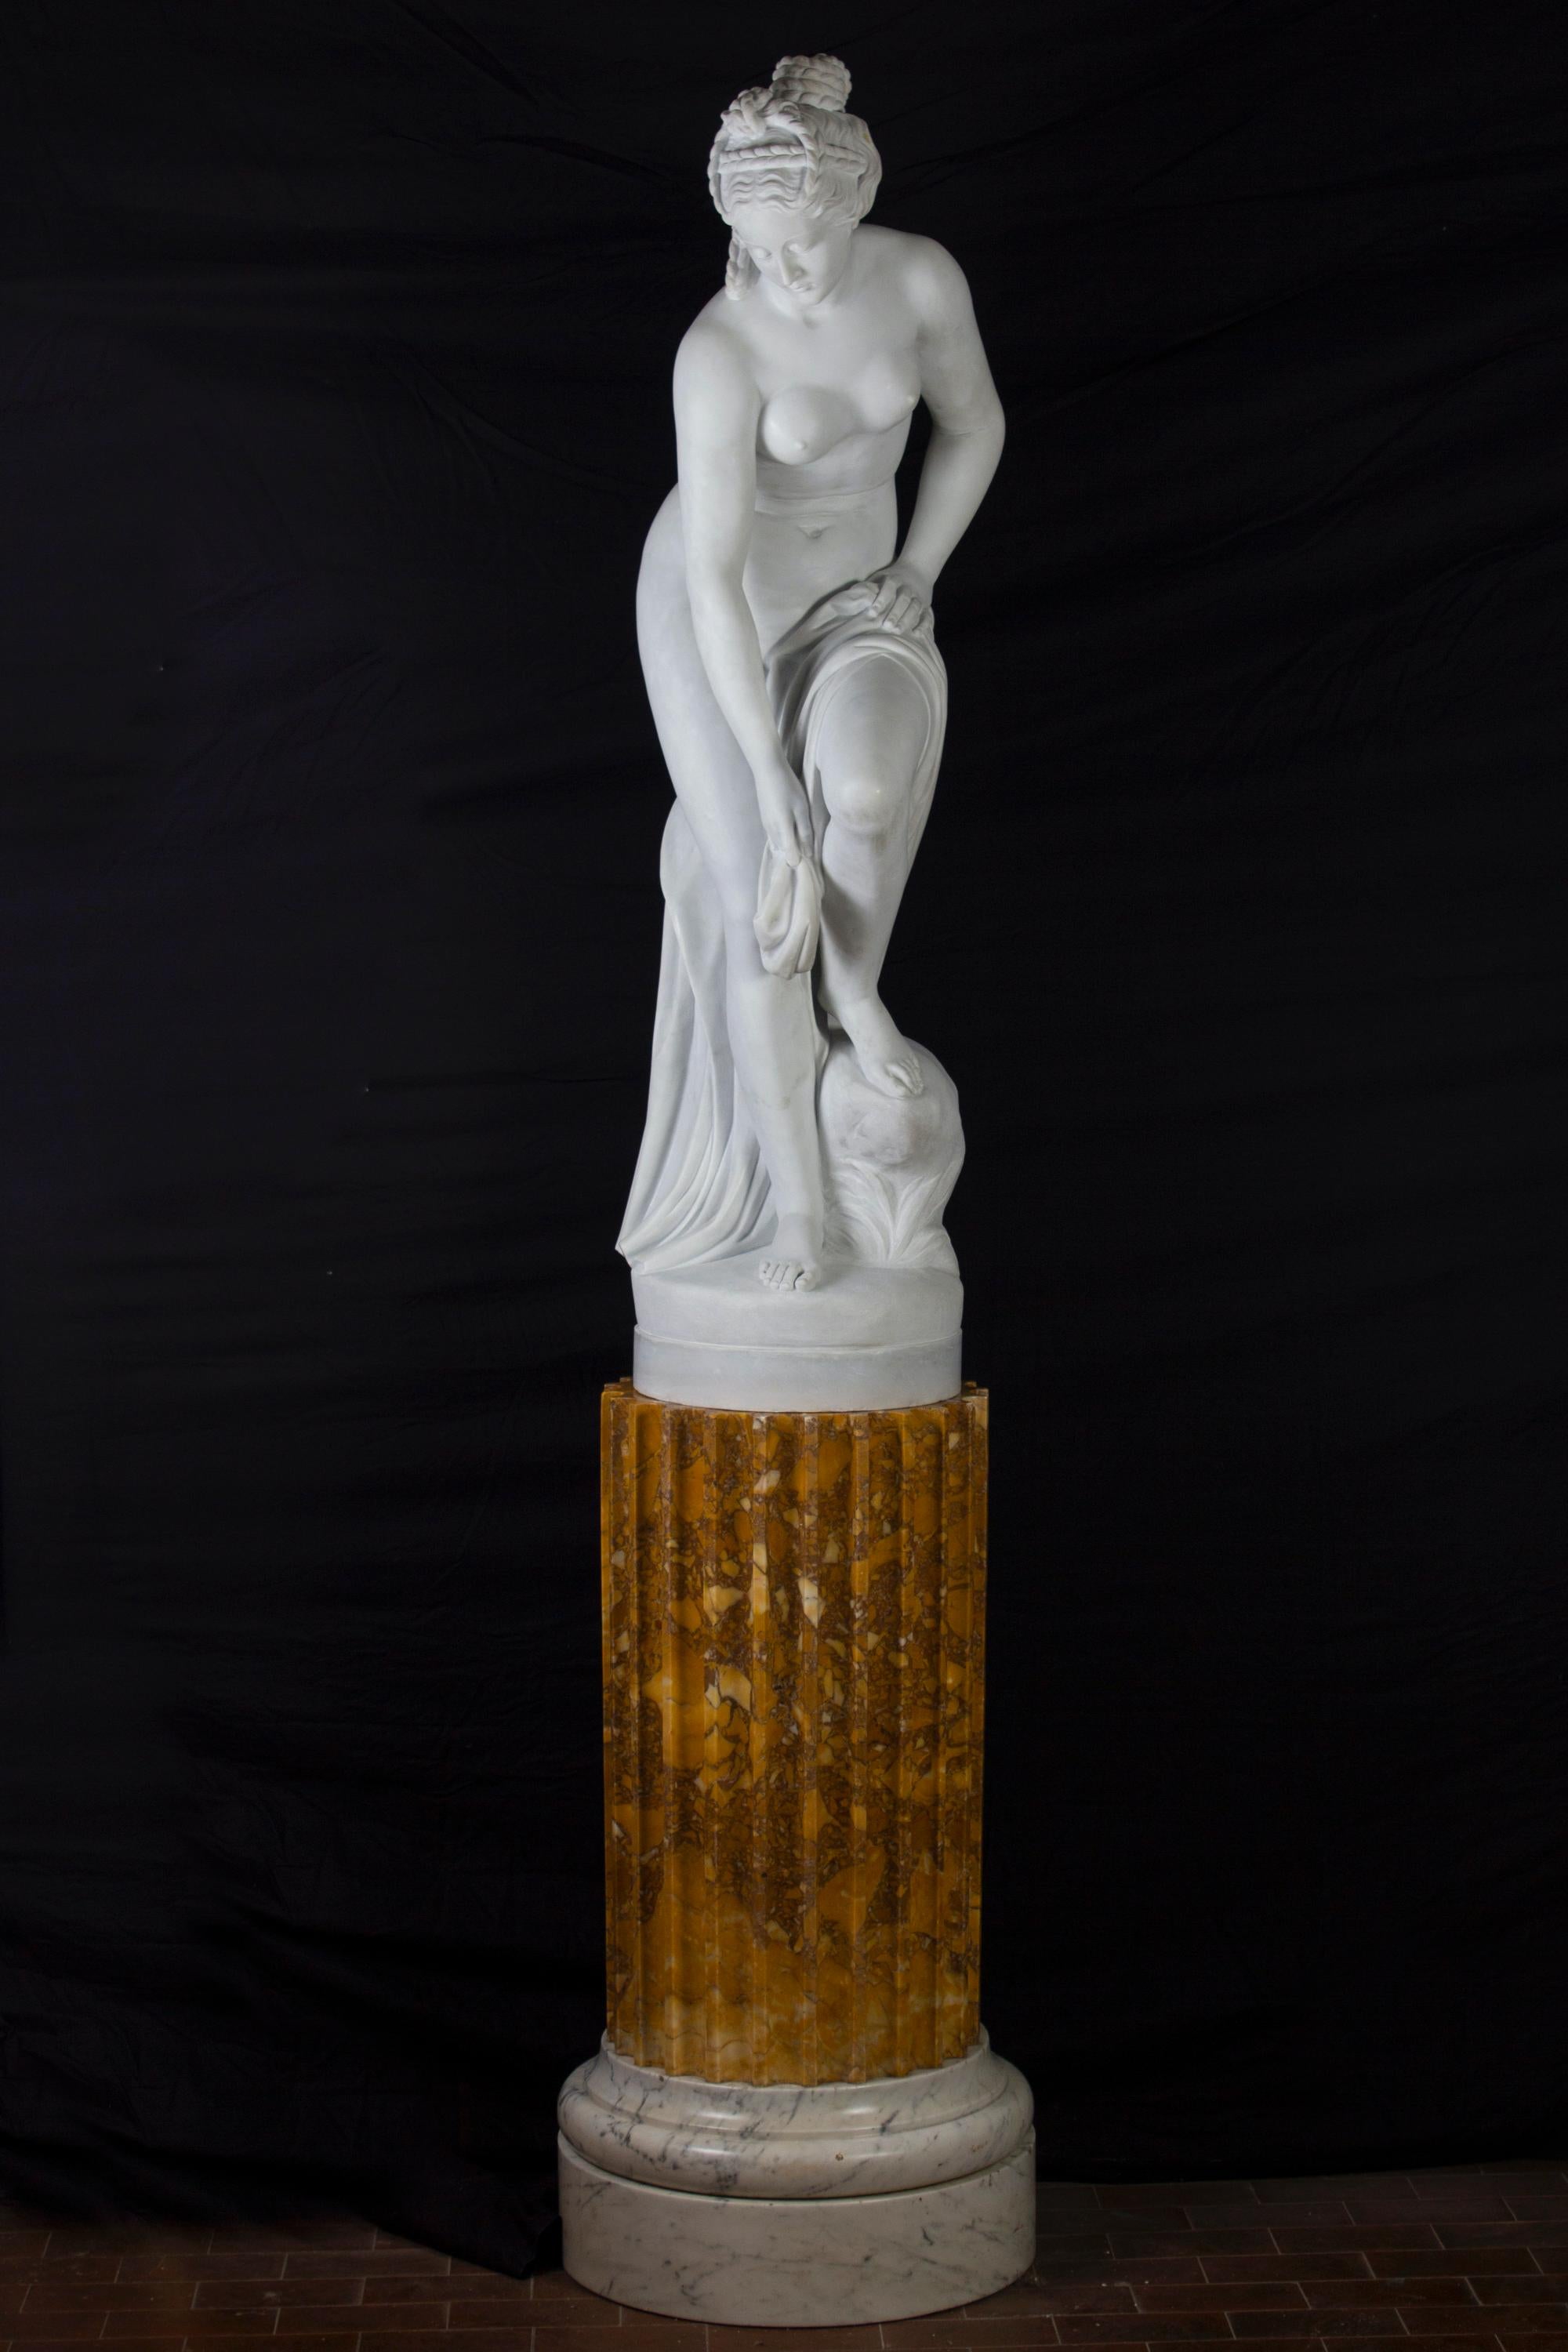 
Late 19th century French finely carved white Carrara marble figure of Bathing Venus  . The marble base is not included in the price. 
AFTER CHRISTOPHE-GABRIEL ALLEGRAIN (FRENCH, 1710-1795): A 19TH CENTURY MARBLE FIGURE OF VENUS SORTANT DU BAIN the